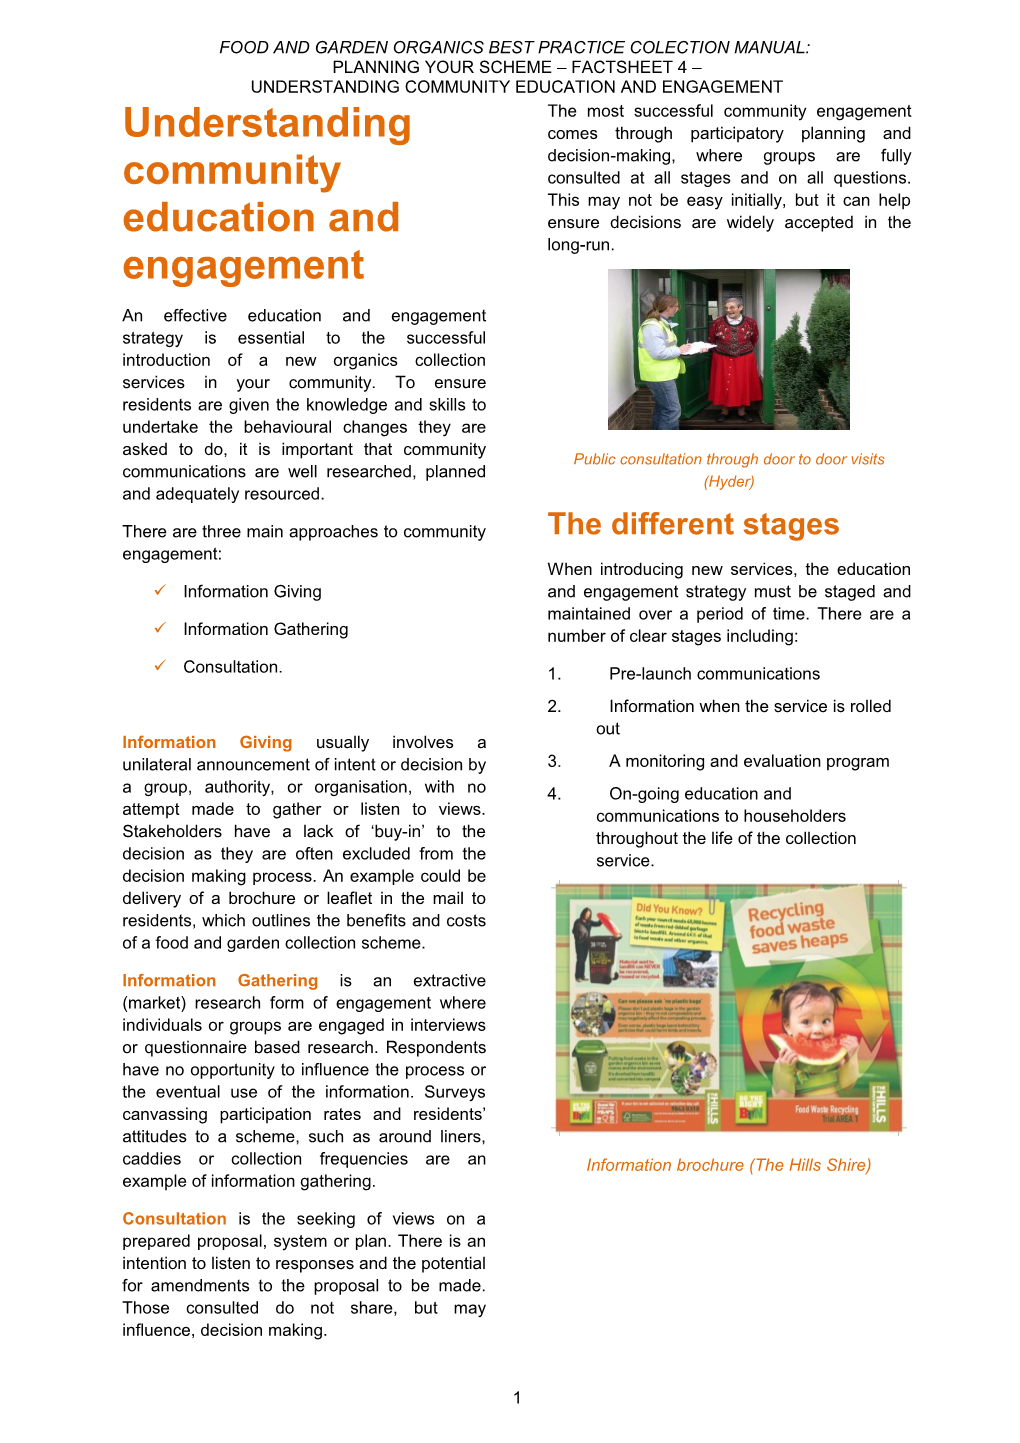 Understanding Community Education and Engagement - Fact Sheet